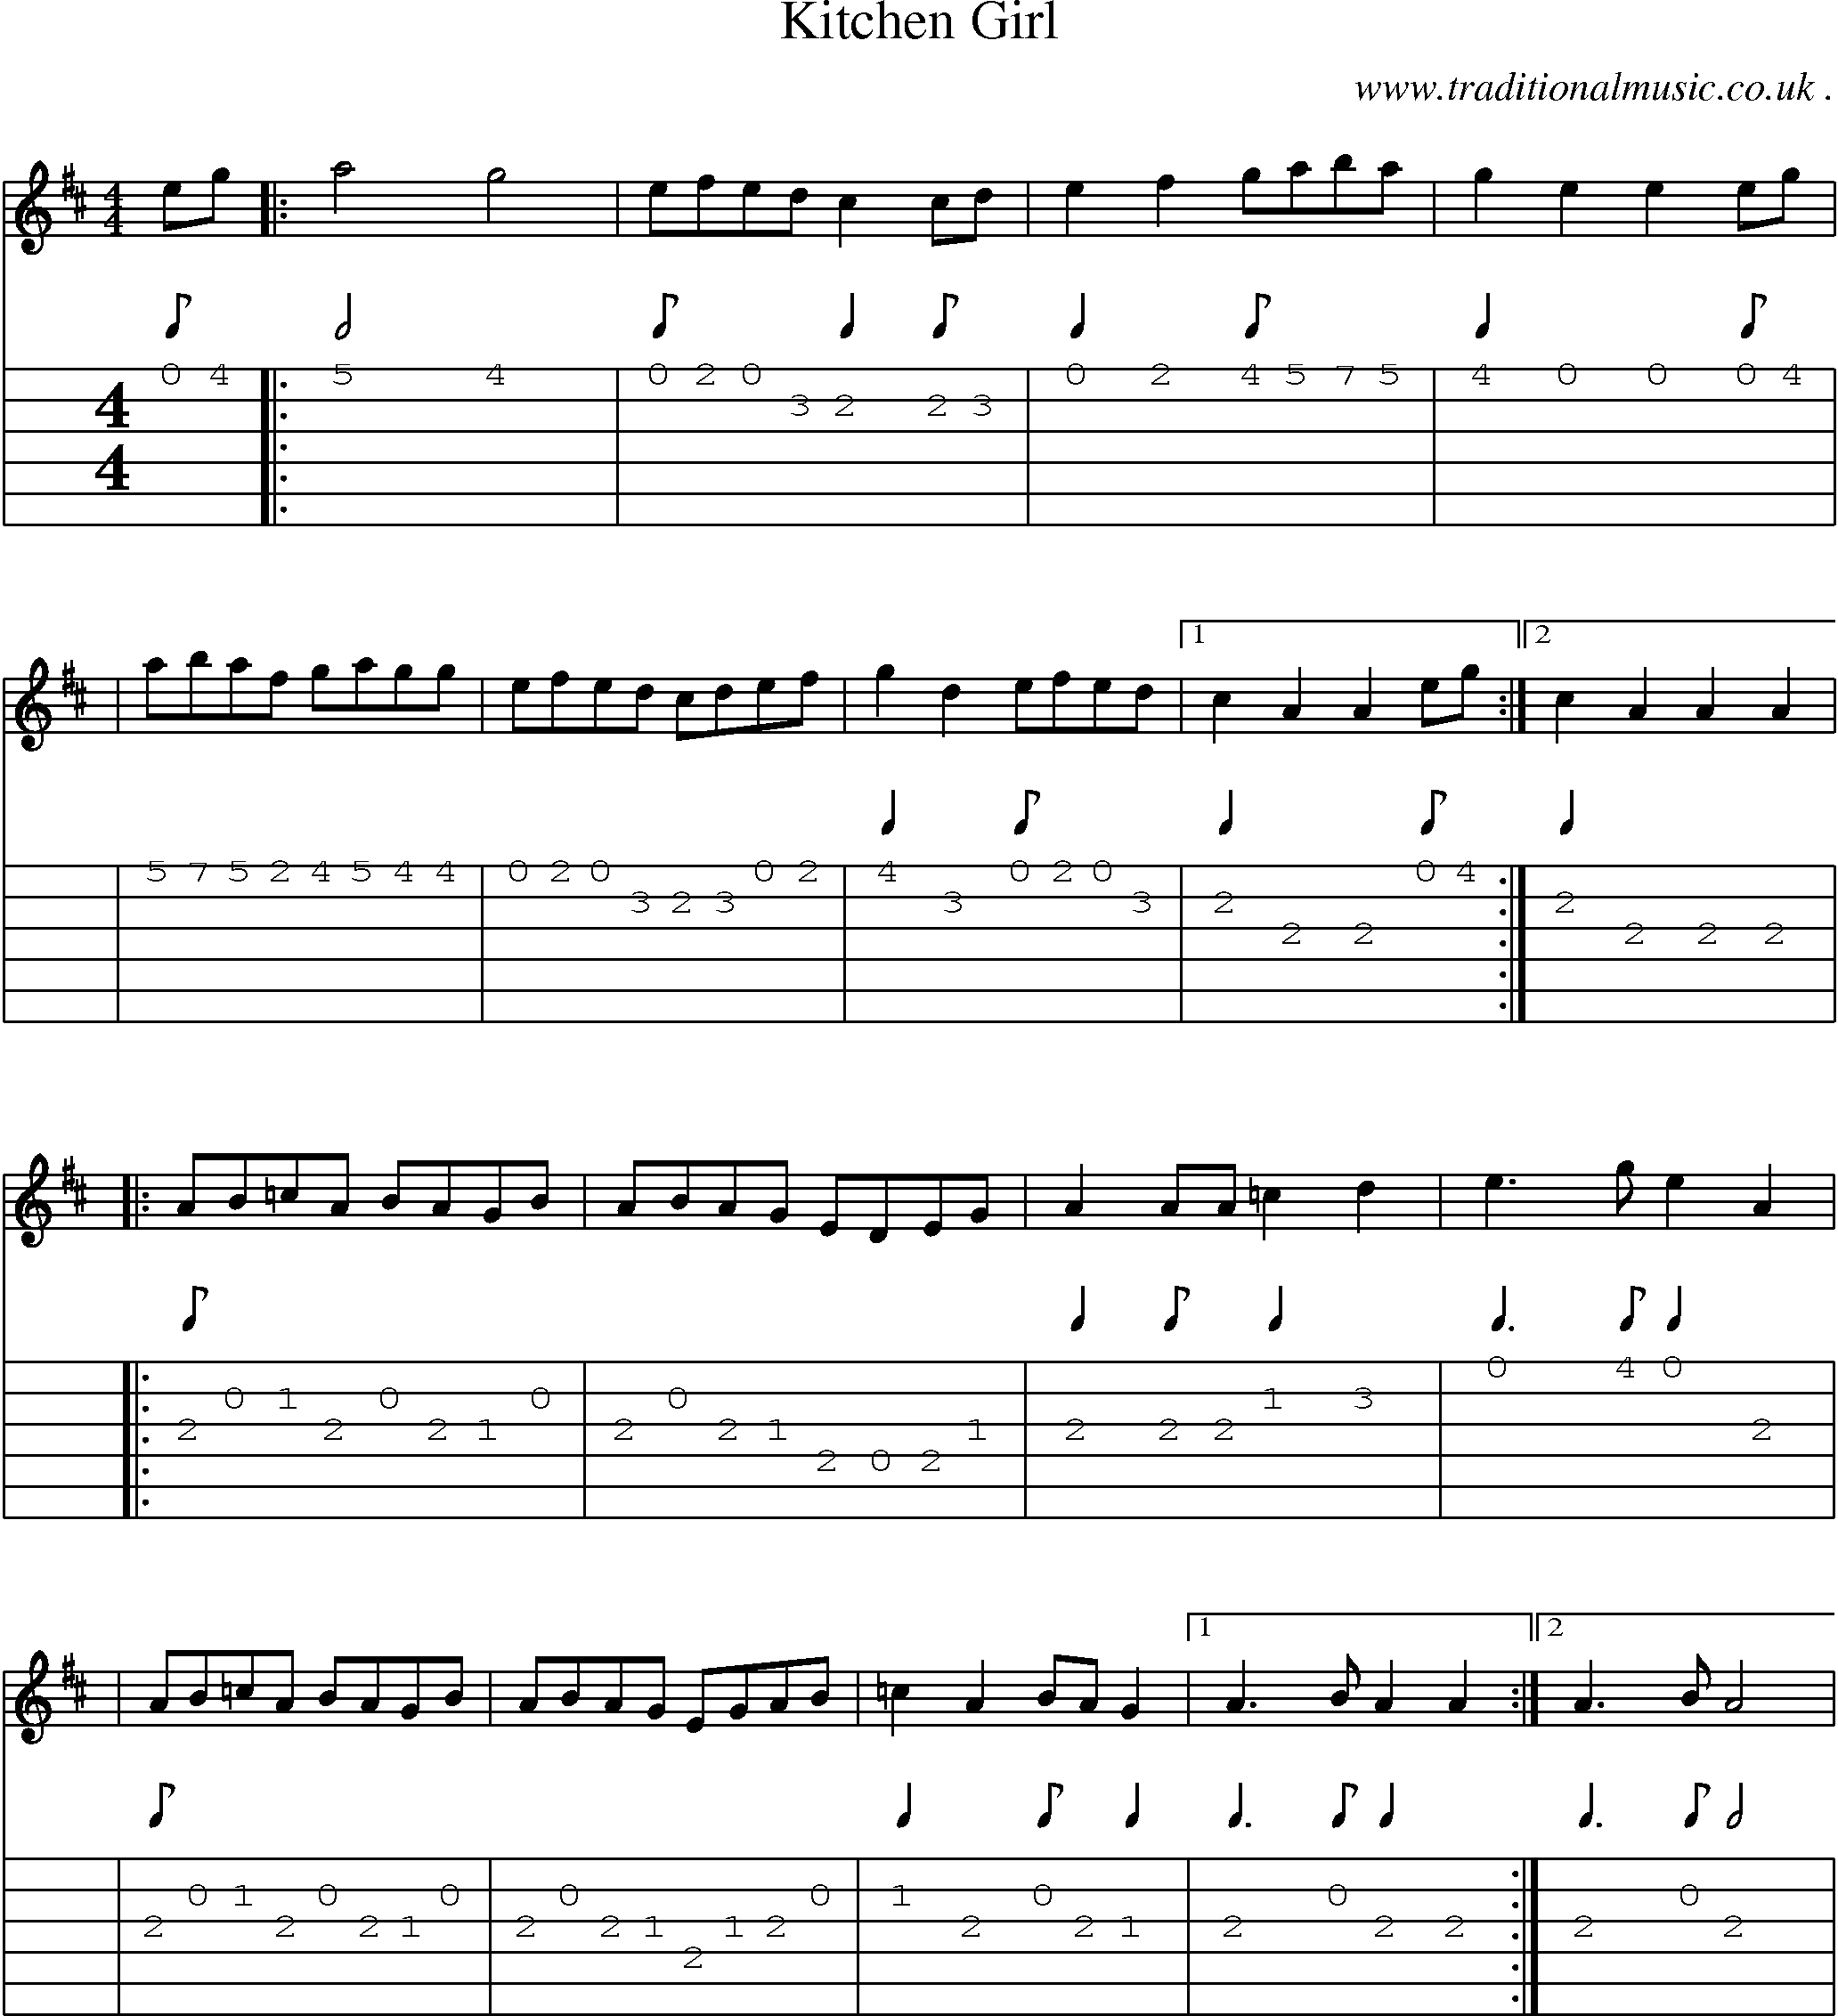 Sheet-Music and Guitar Tabs for Kitchen Girl